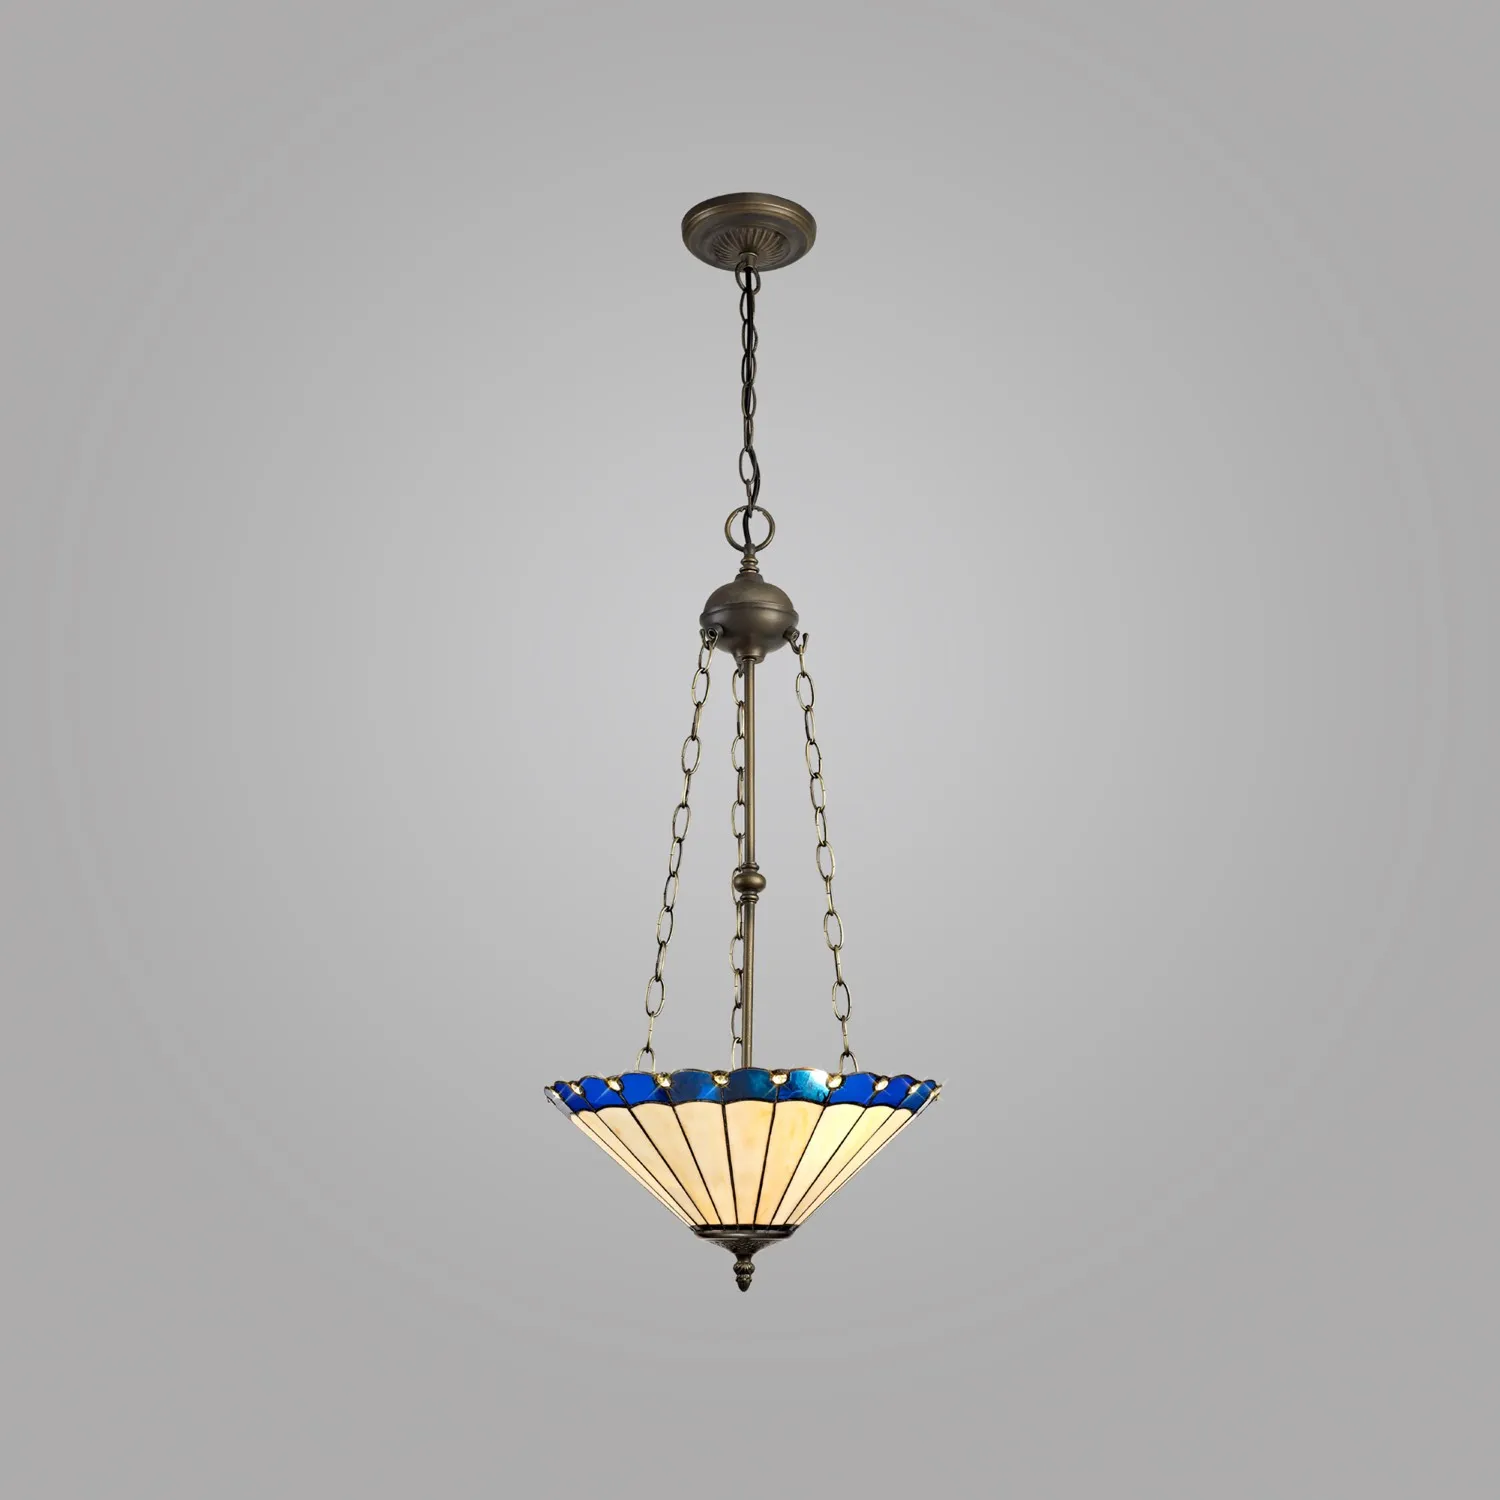 Ware 3 Light Uplighter Pendant E27 With 40cm Tiffany Shade, Blue Cream Crystal Aged Antique Brass